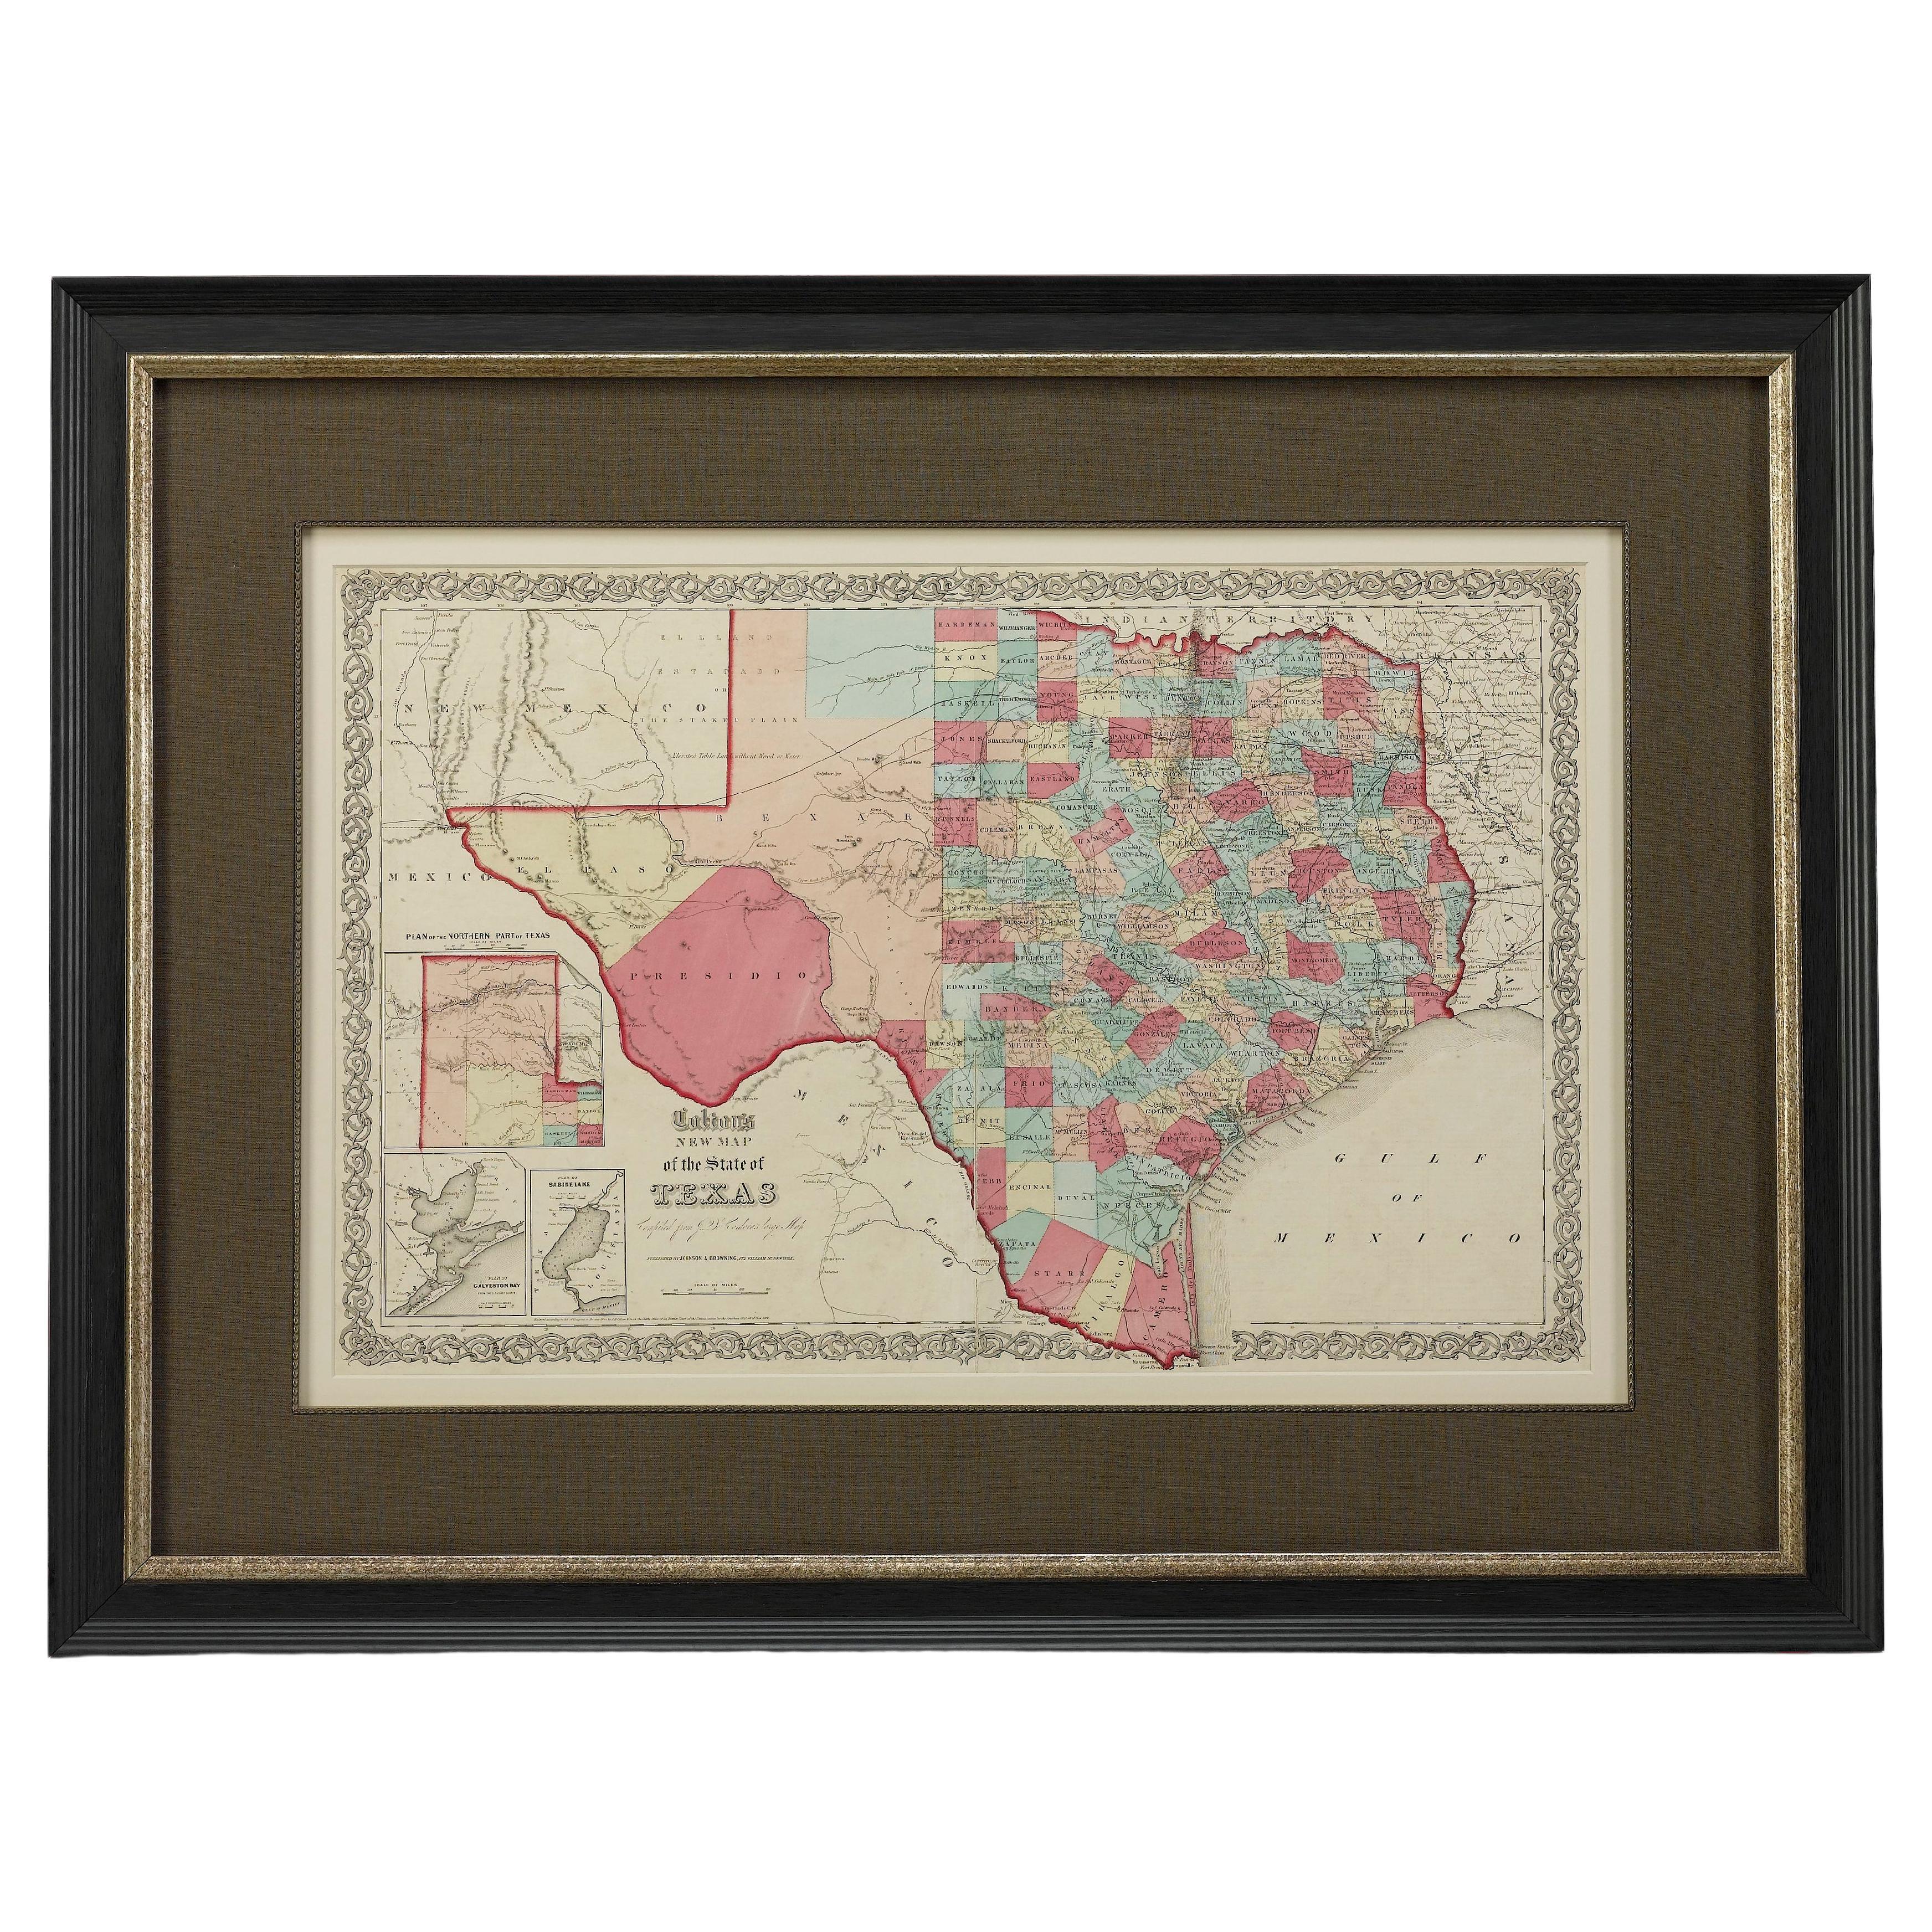 "Colton's New Map of the State of Texas..." de 1859 par Johnson & Browning en vente